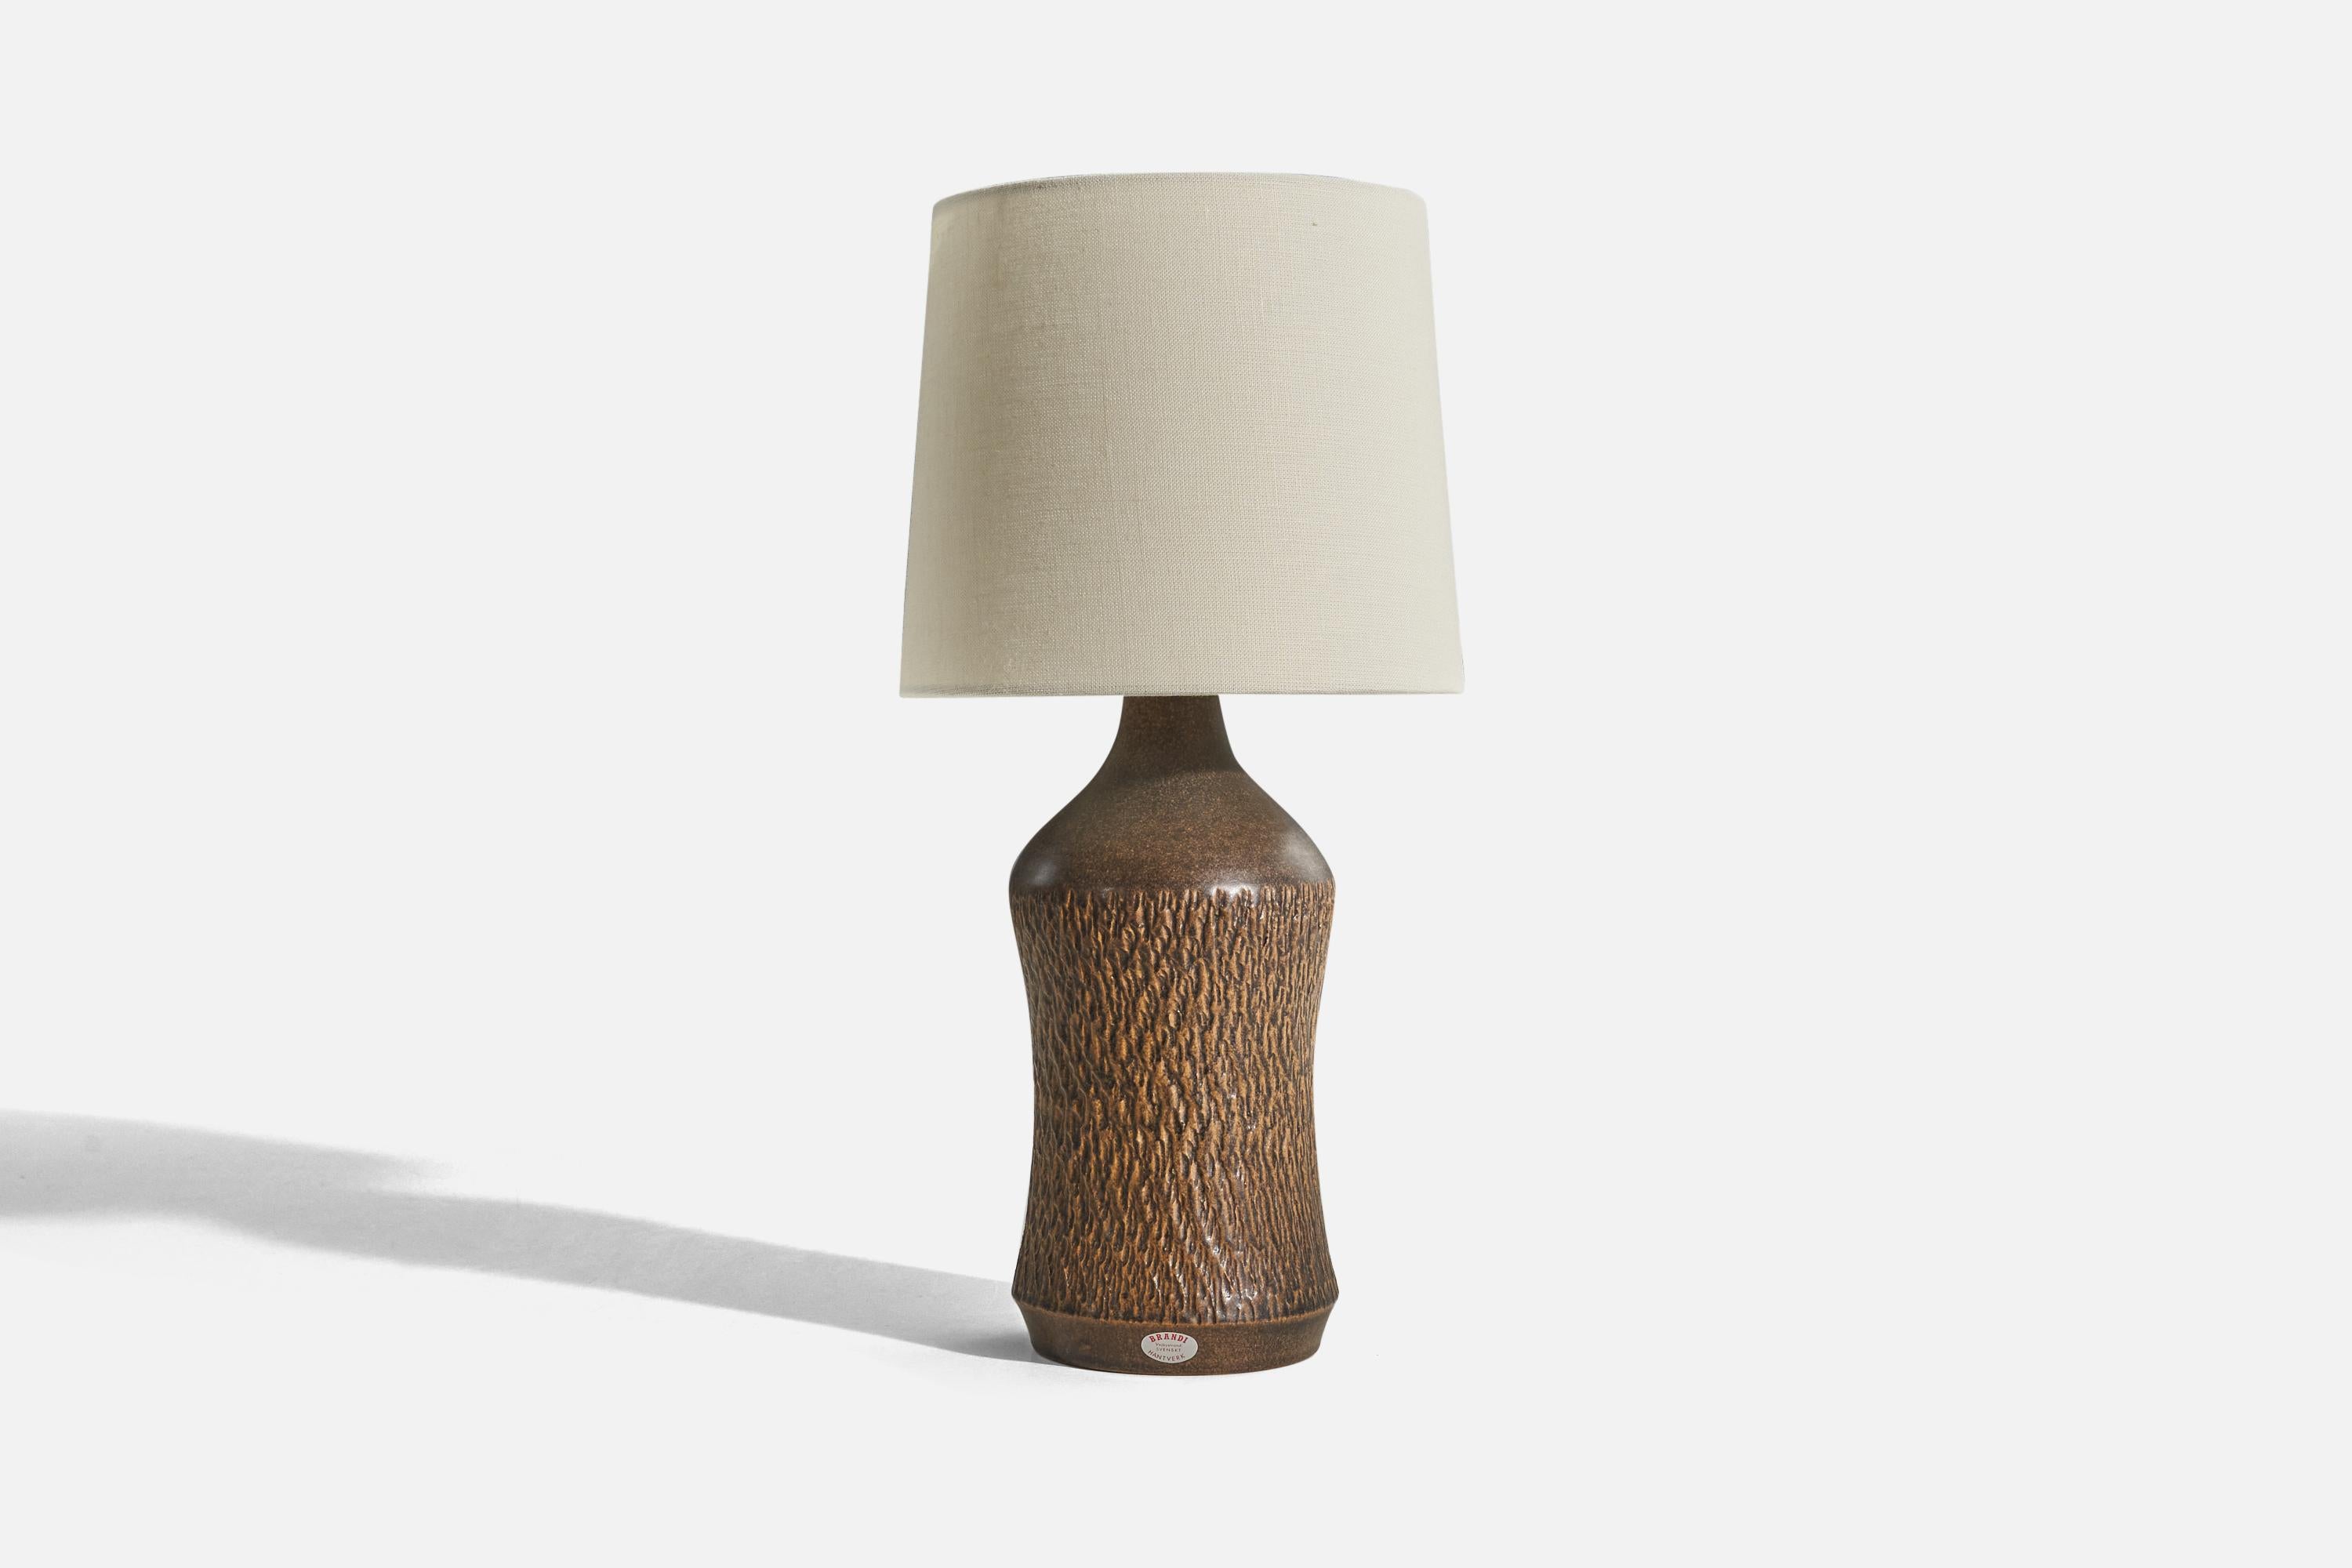 A brown, glazed stoneware table lamp designed by Henry Brandi and produced by his own firm, Brandi Vejbystrand, Sweden, 1960s. 

Sold without lampshade. 
Dimensions of Lamp (inches) : 12.12 x 4.81 x 4.81 (H x W x D)
Dimensions of Shade (inches)